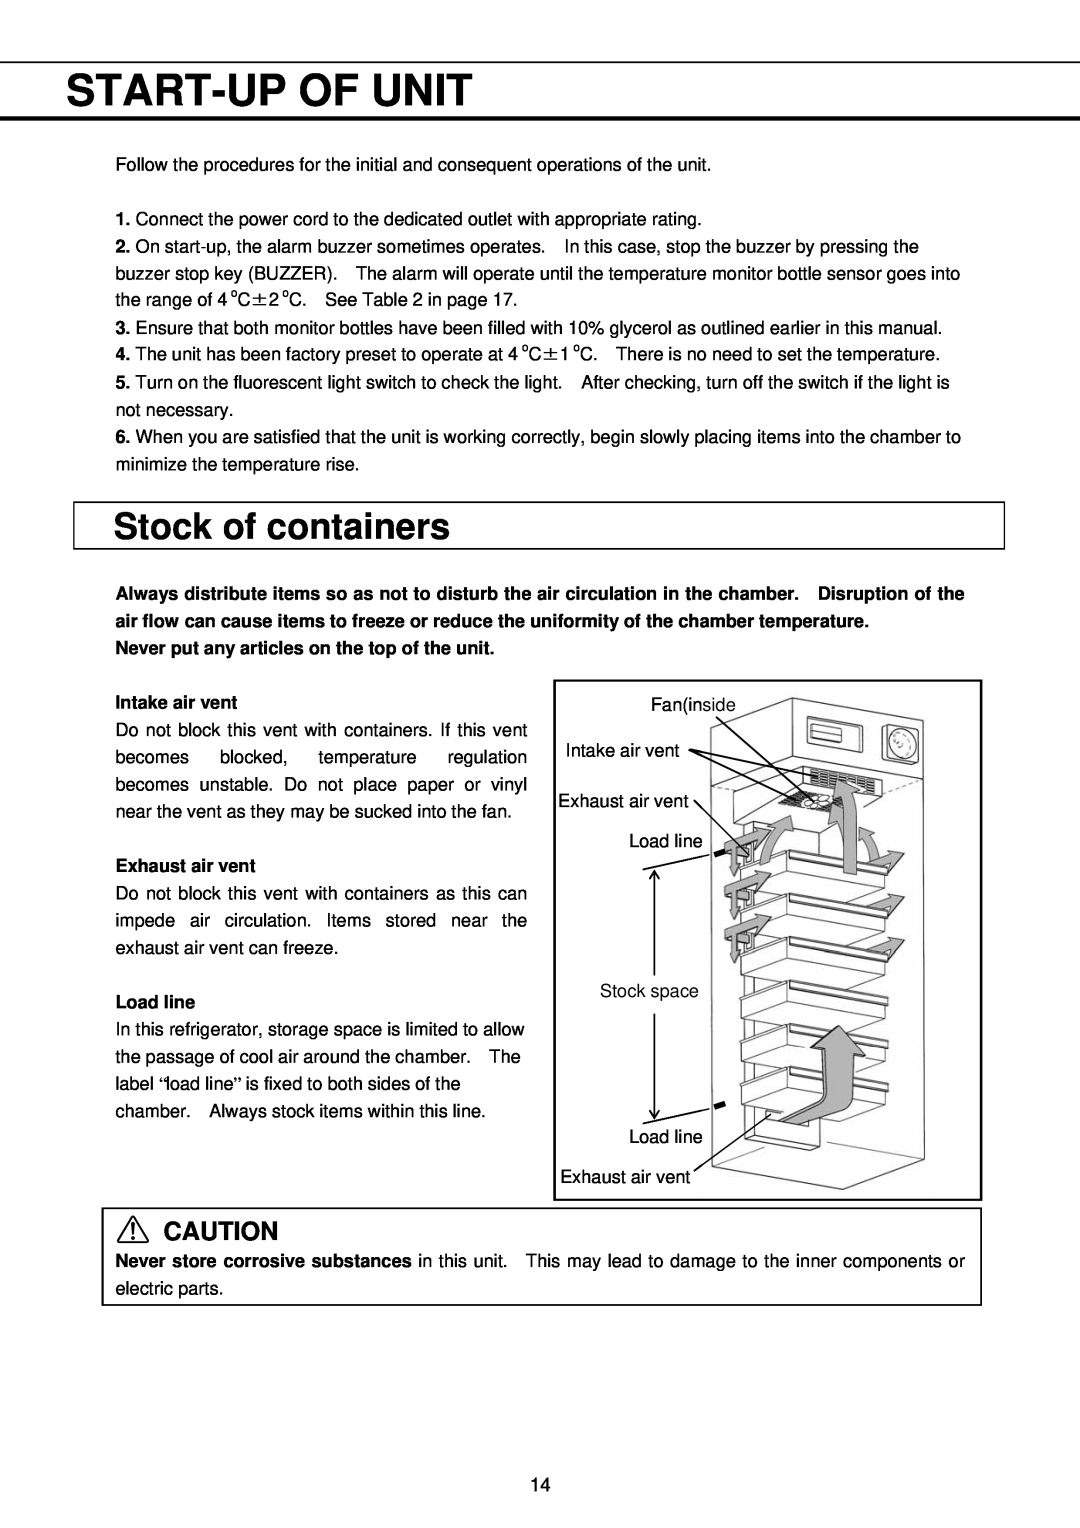 Sanyo MBR-704GR instruction manual Start-Upof Unit, Stock of containers 